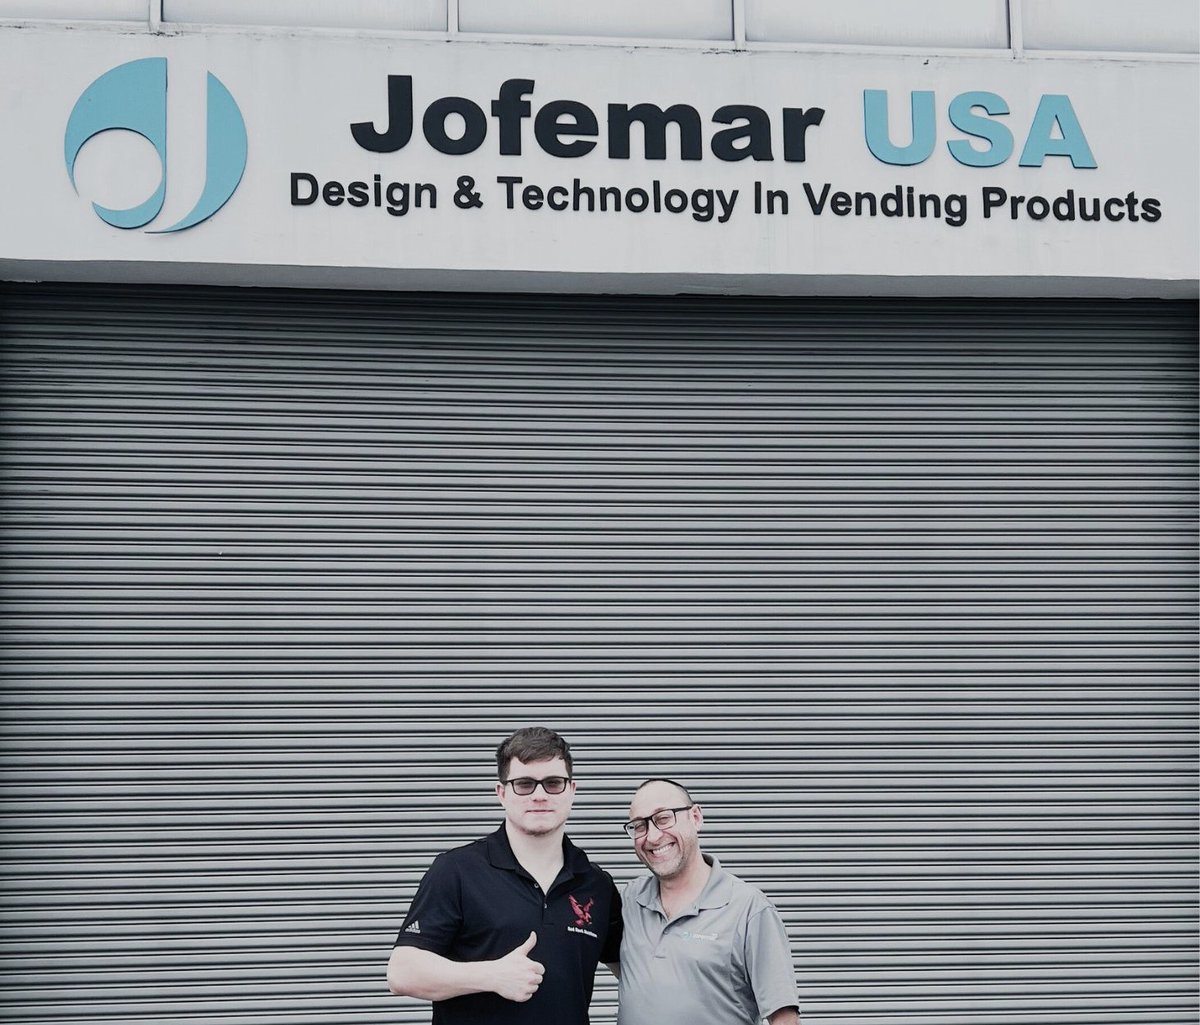 Raising the bar in vending services with Red Hawk Vending's advanced technician training at Jofemar USA! 🌟 #VendingInnovation #ServiceQuality wix.to/J1PeVsr